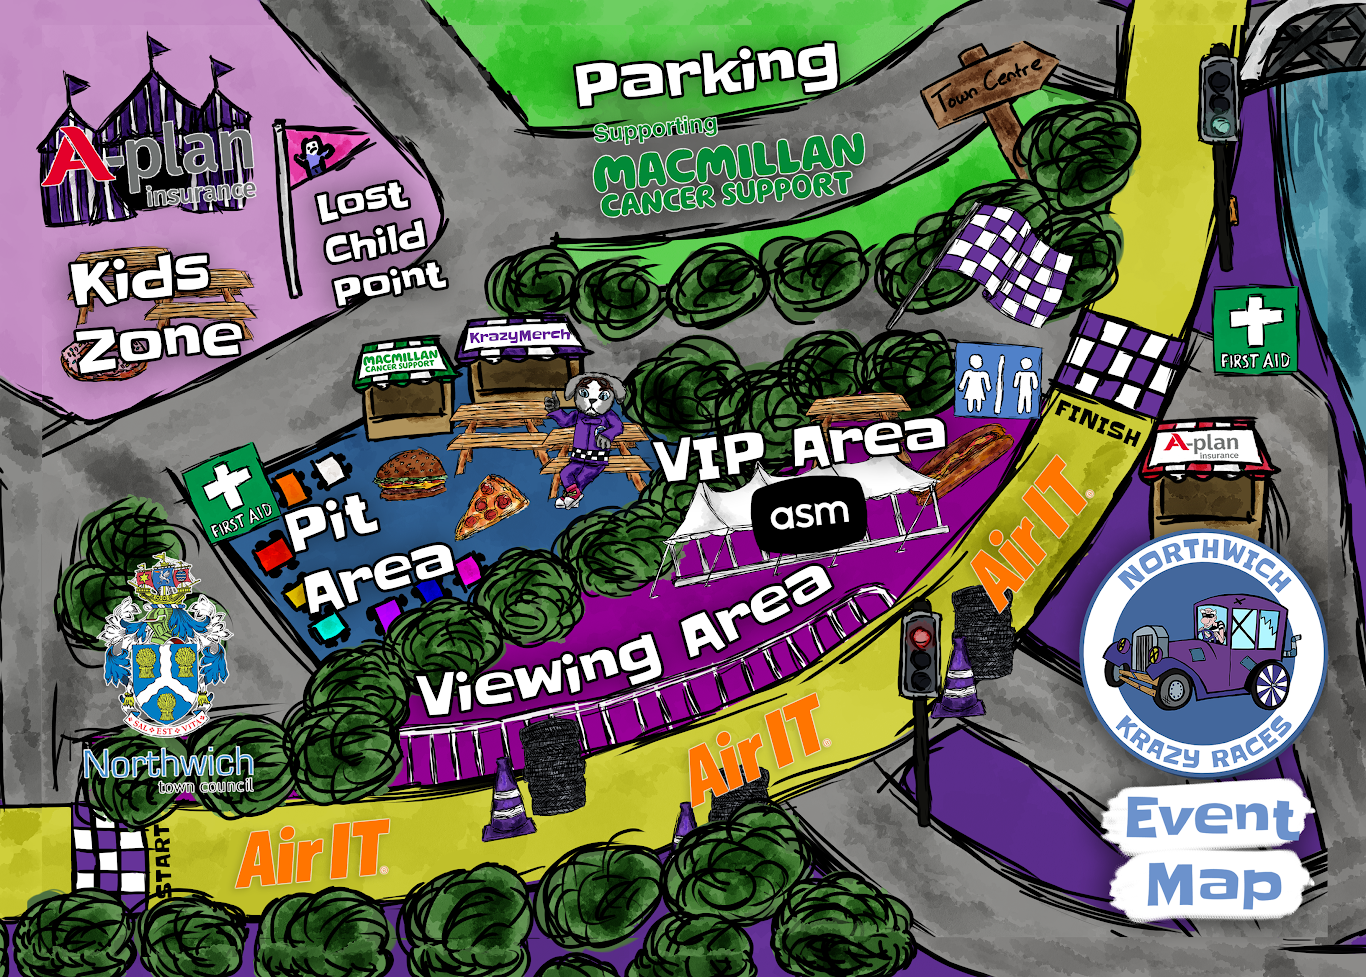 Northwich Krazy Races Event Map